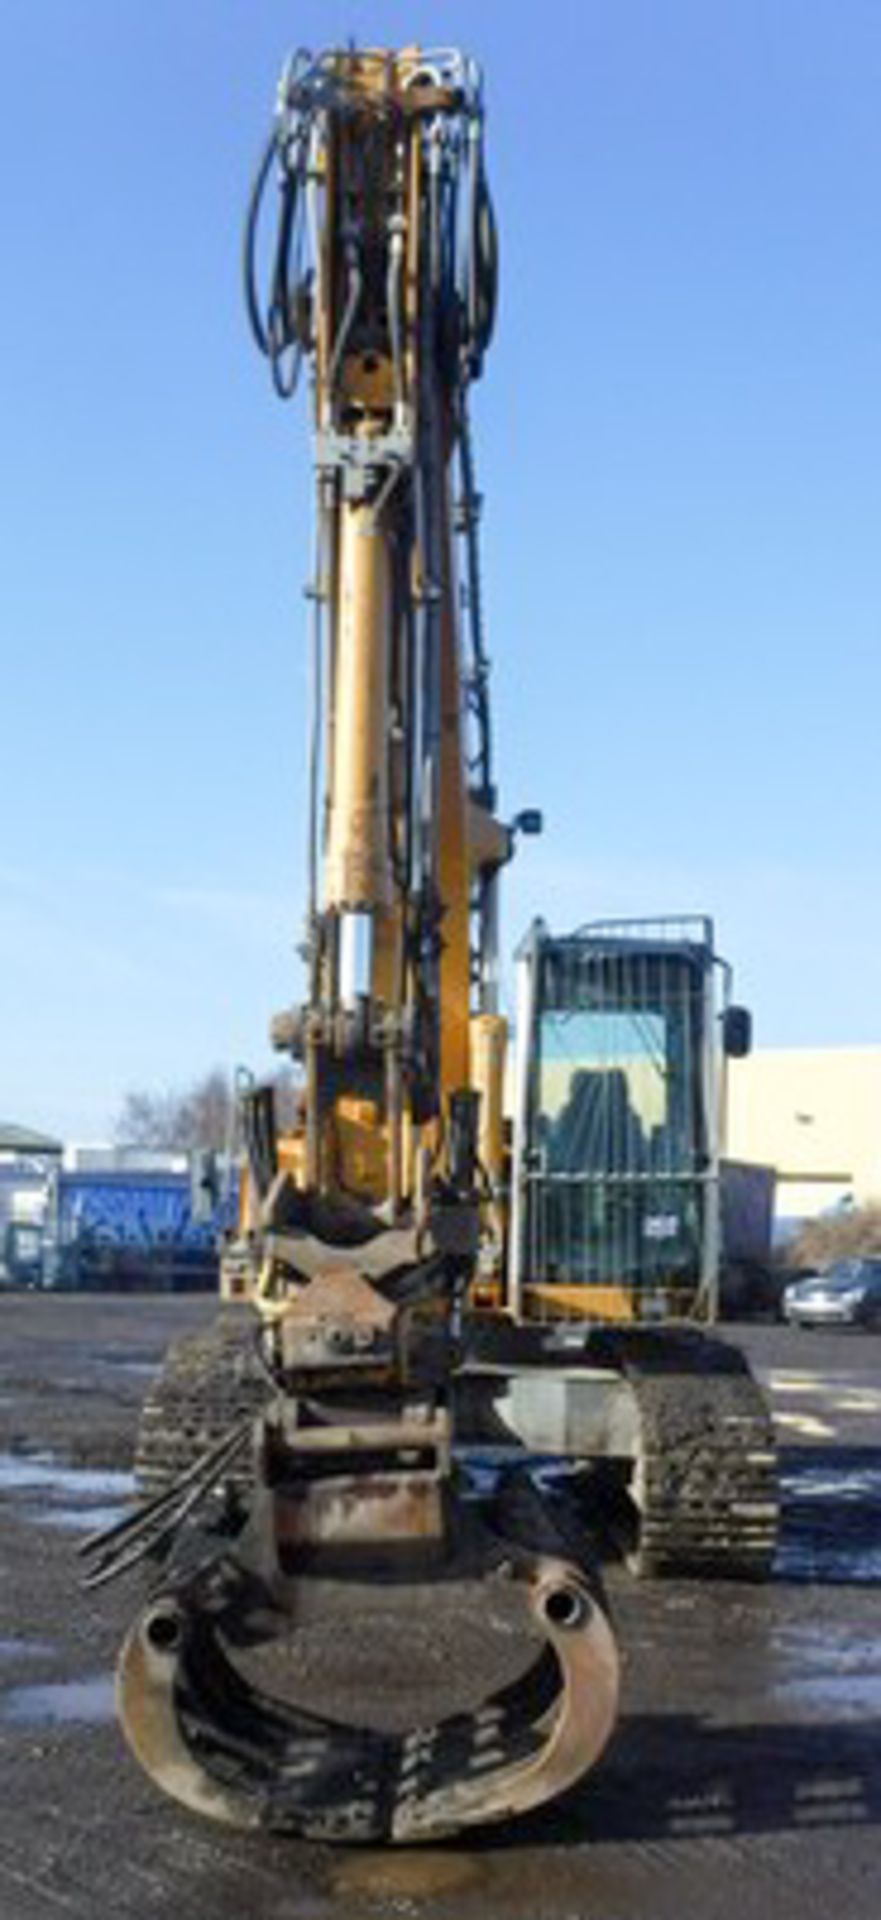 2004 LIEBHERR R-904, S/N 668-12514, 8364HRS (NOT VERIFIED), ENGCON GRAB, MAX REACH 8.4M, FITTED WITH - Image 11 of 18